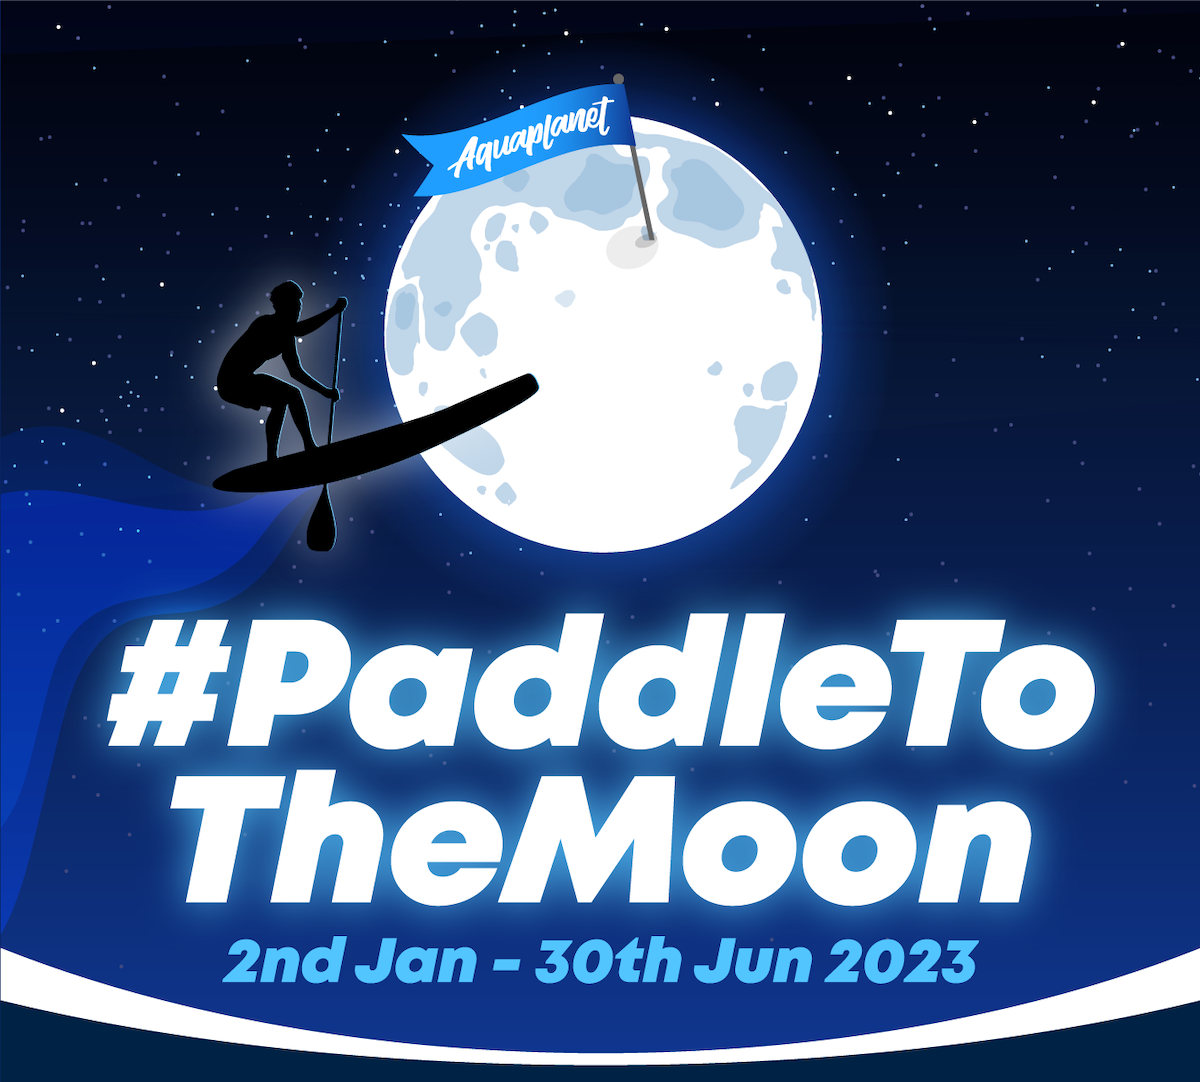 paddle to the moon image 10